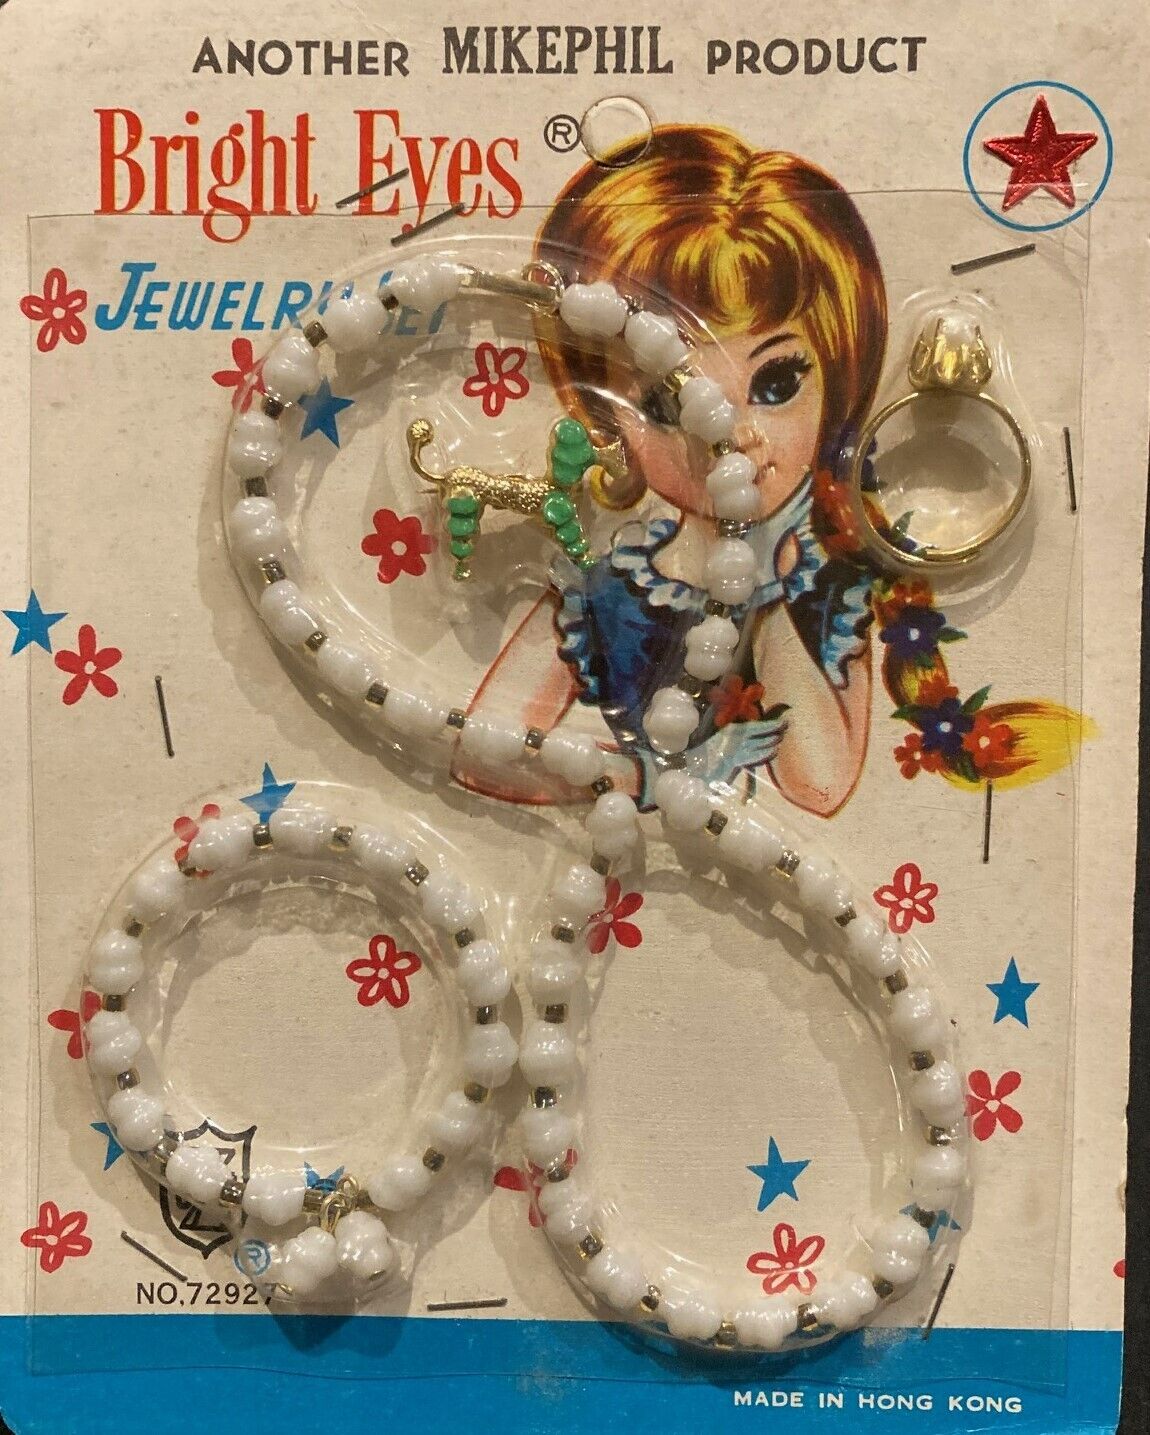 1960s Vintage Bright Eyes Jewelry Set &Poodle Pin for a Little Girl or Display.